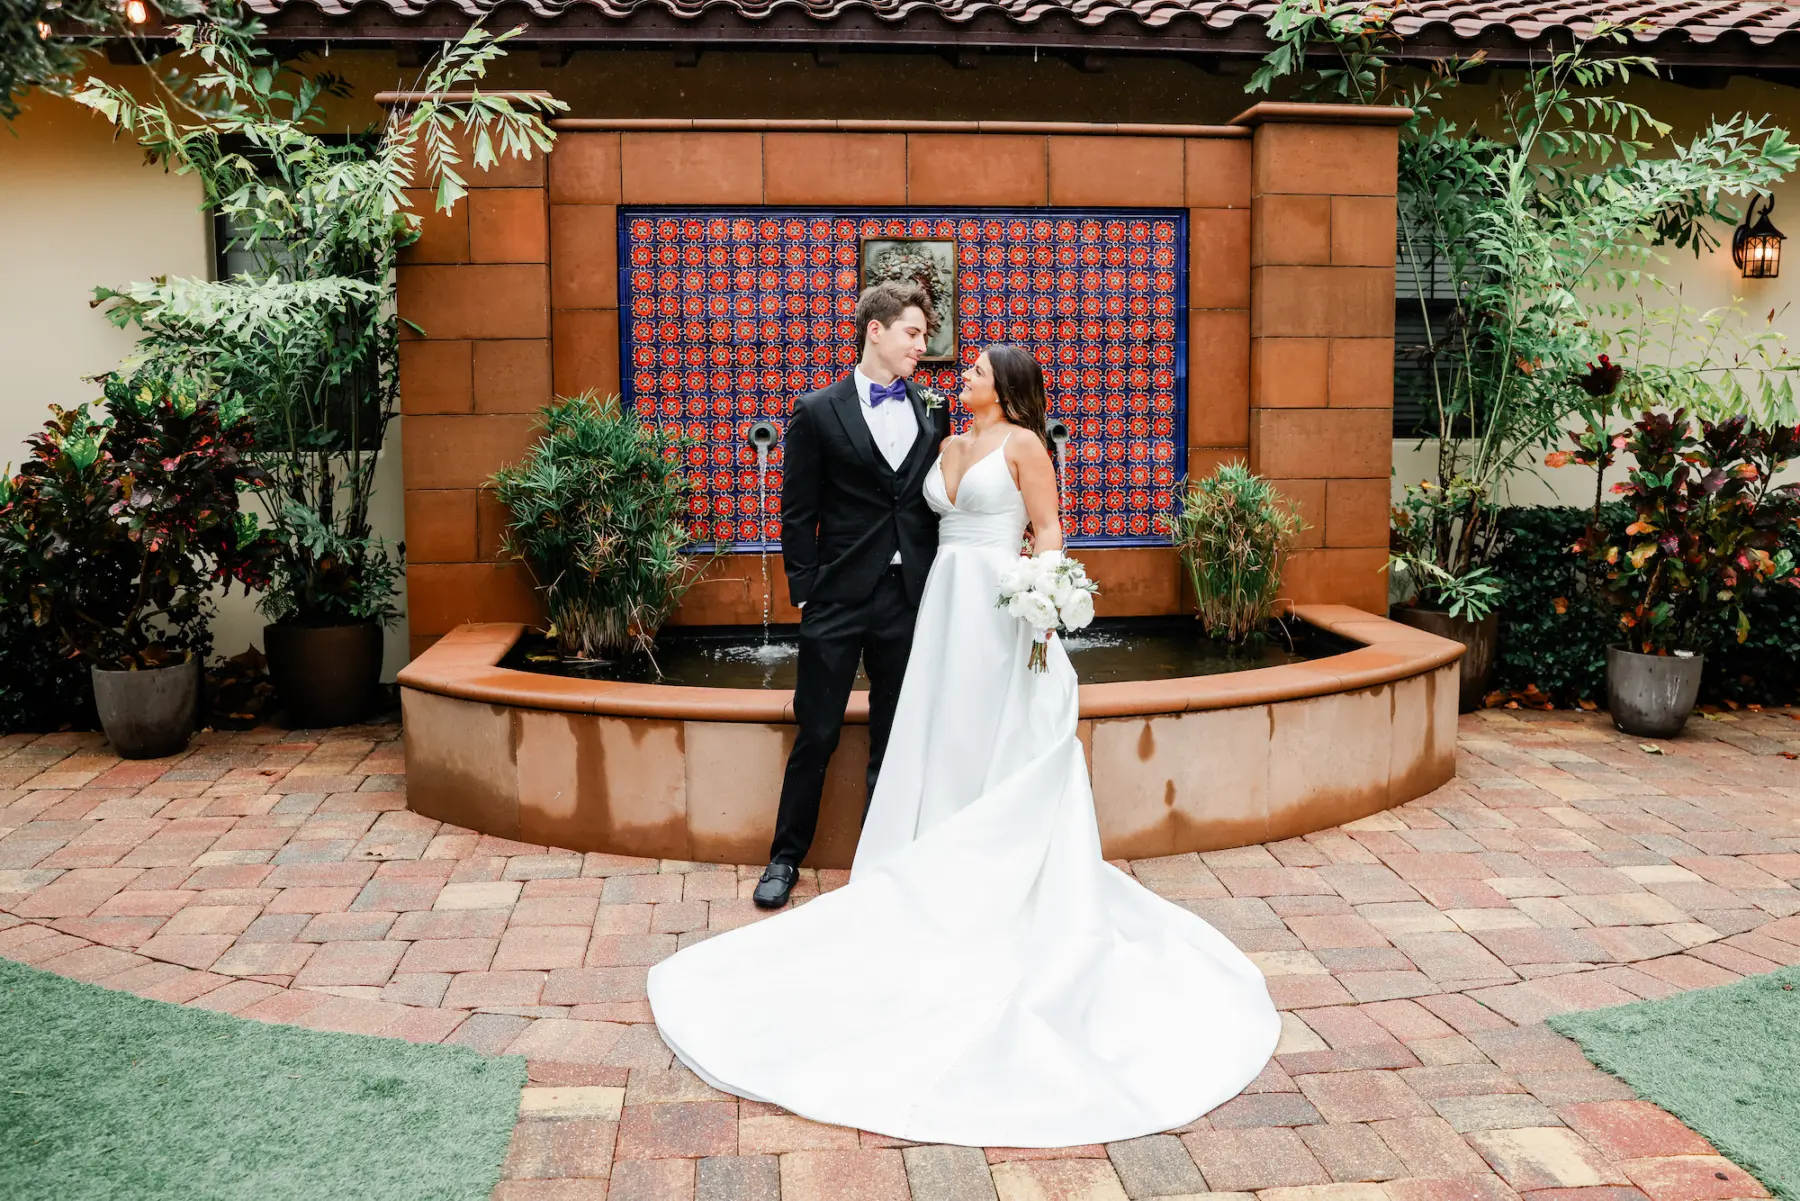 Bride and Groom Spanish Inspired Courtyard Fountain Wedding Portrait | Tampa Bay Event Venue Mision Lago Estate